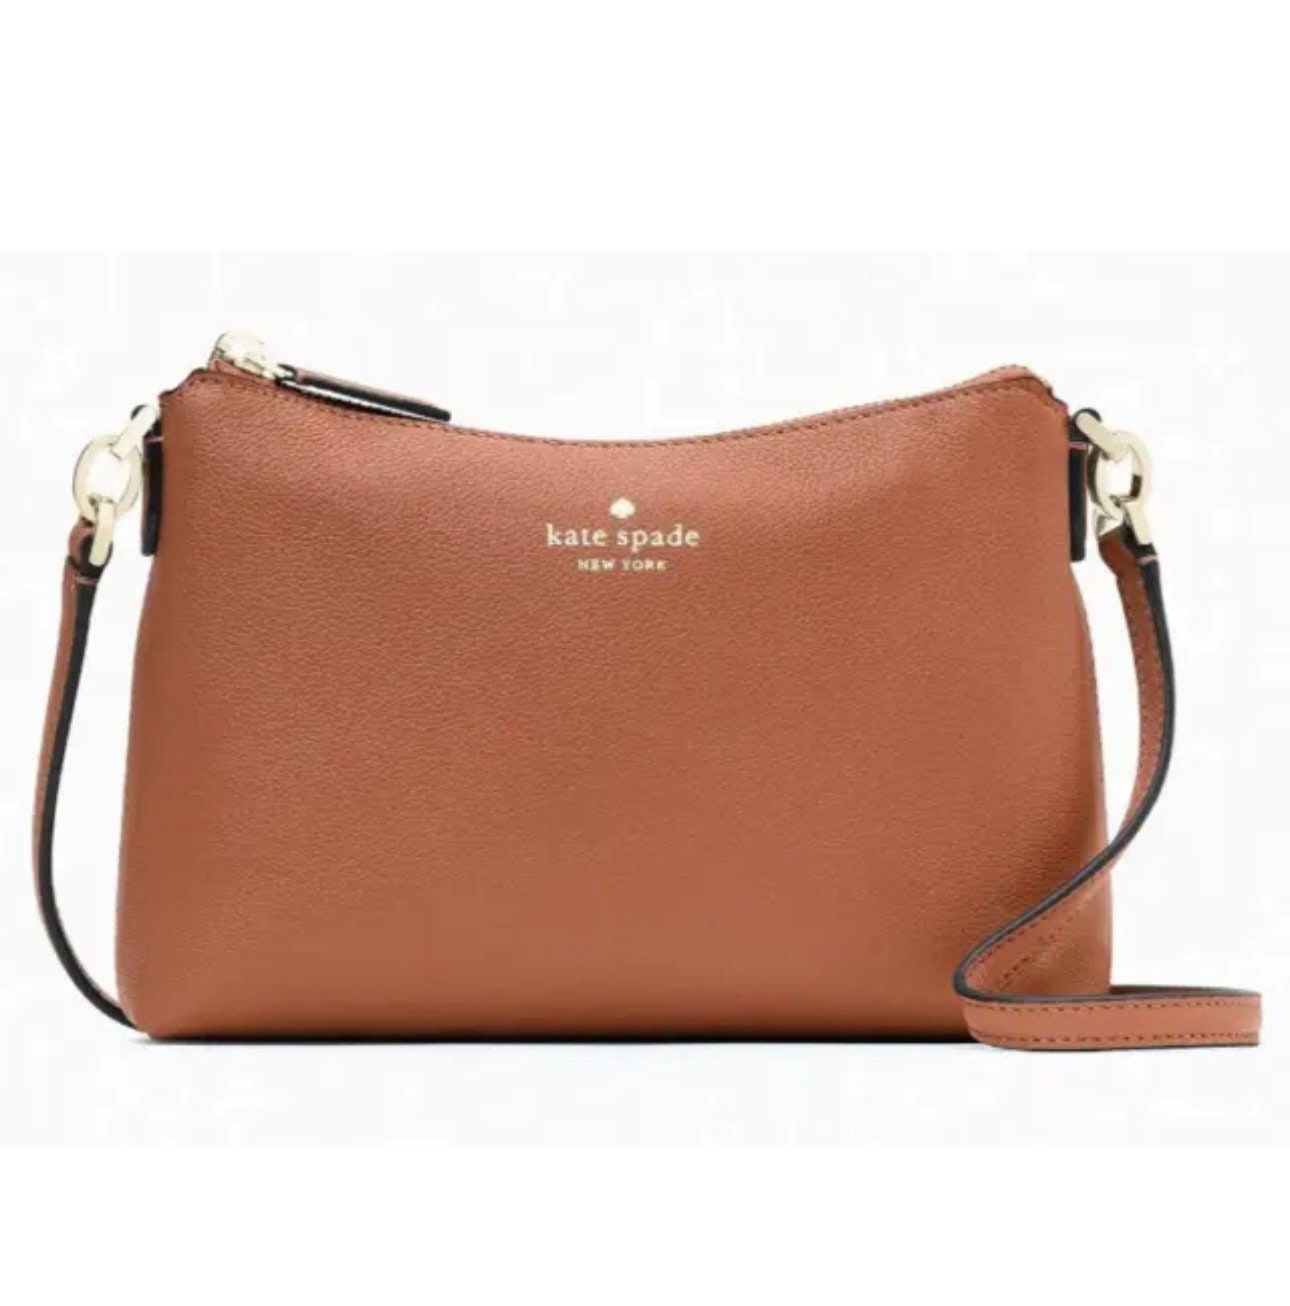 NEW Kate Spade Bailey Leather Crossbody Purse in Multiple Colors MSRP $299